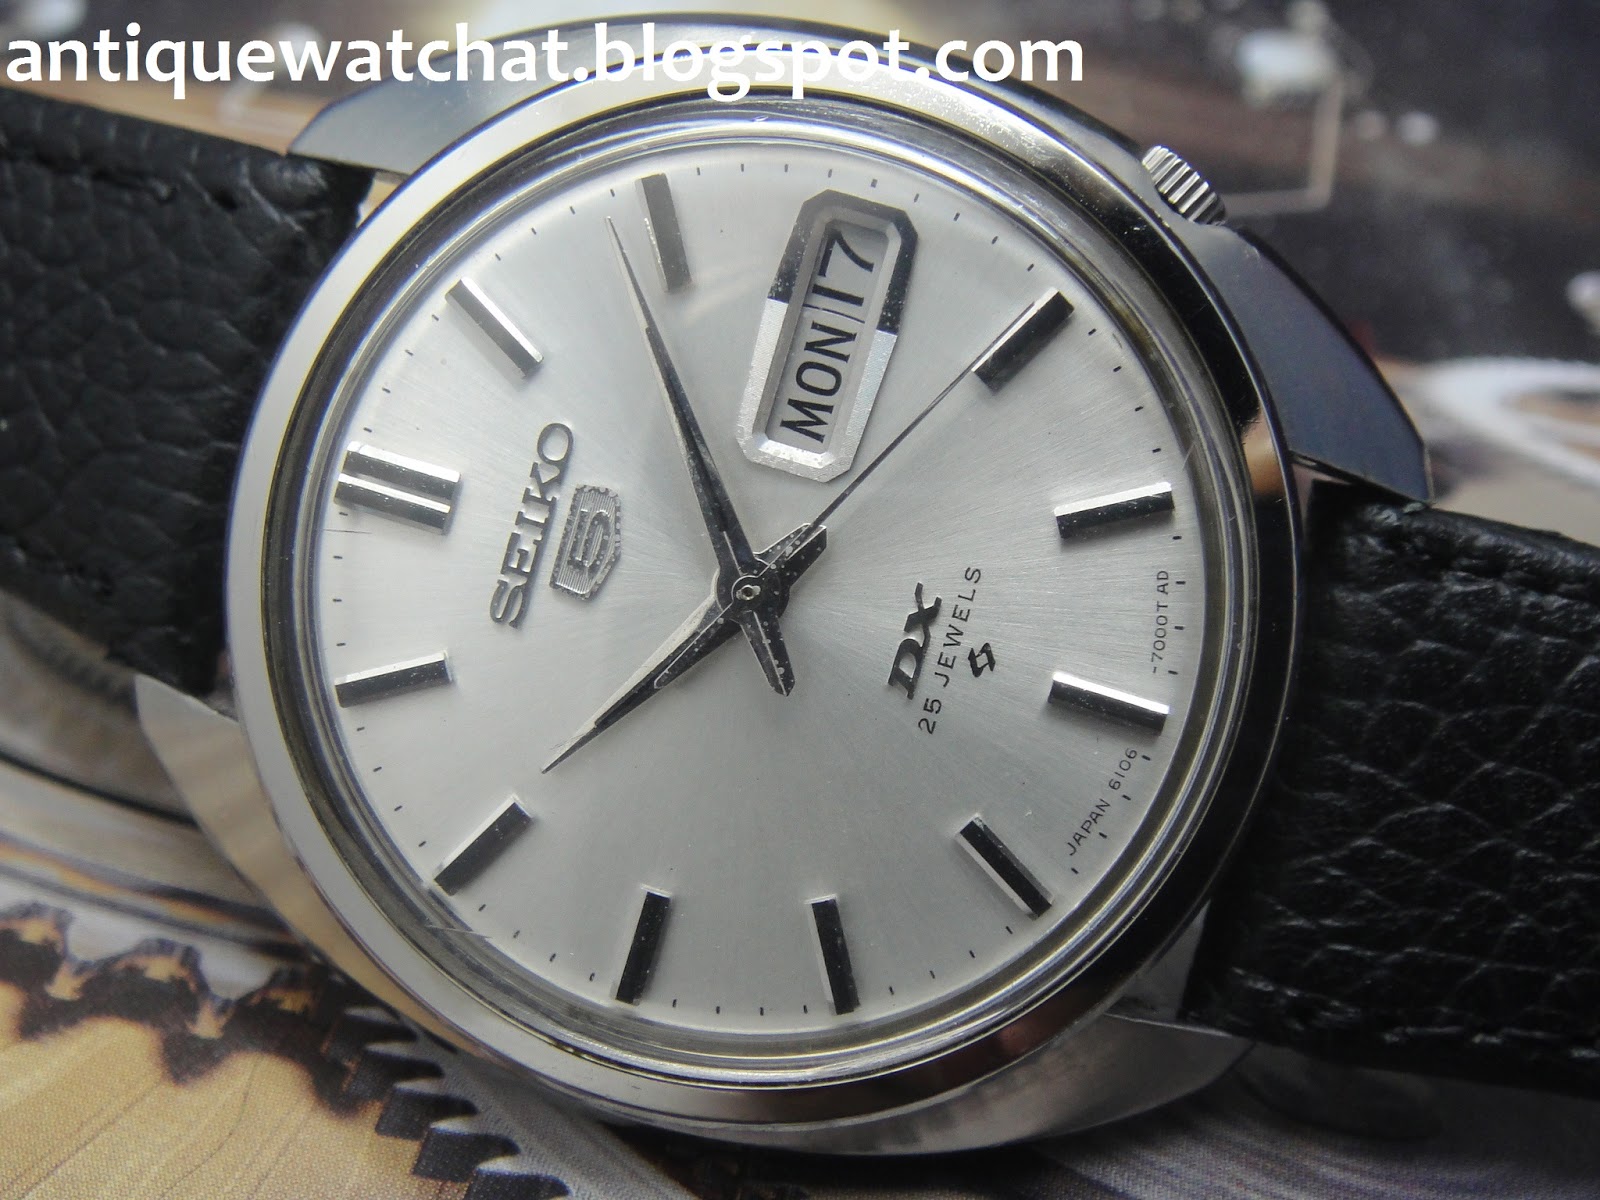 Antique Watch Bar: SEIKO 5 DX AUTOMATIC 6106-7000 S5A48 SOLD